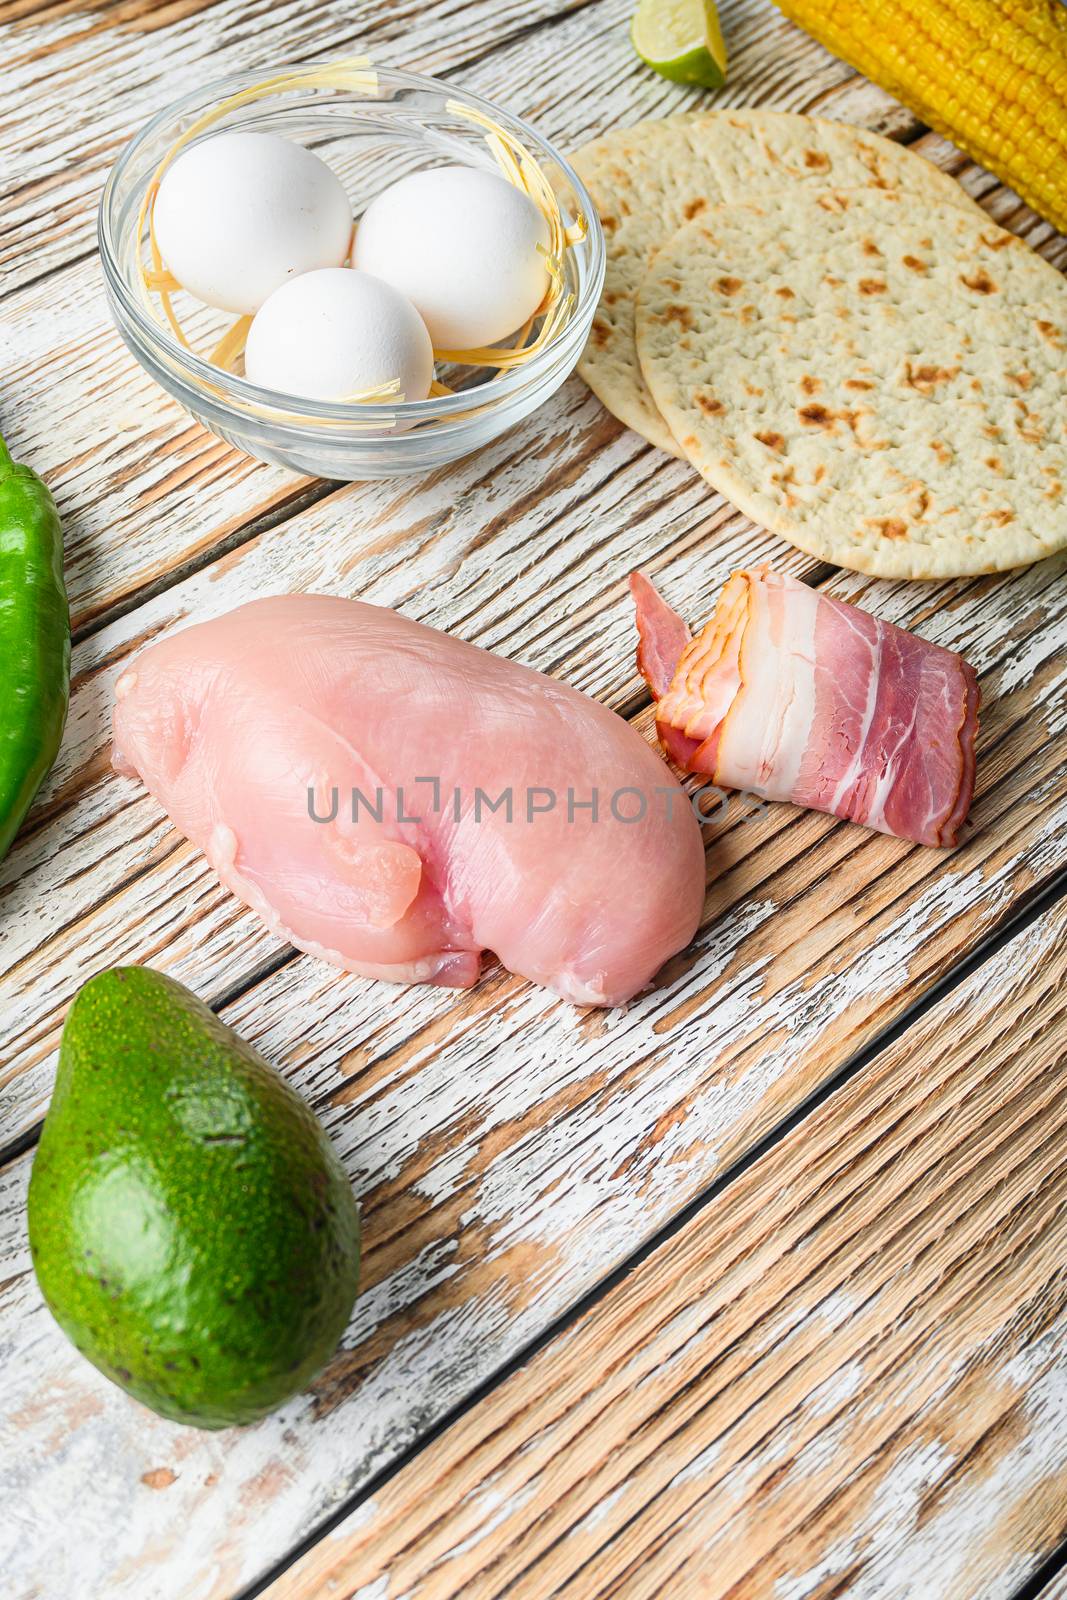 Mexican tacos with vegetables and chicken meat, corna and other ingredients over white textured wooden background , side view with space for text. by Ilianesolenyi